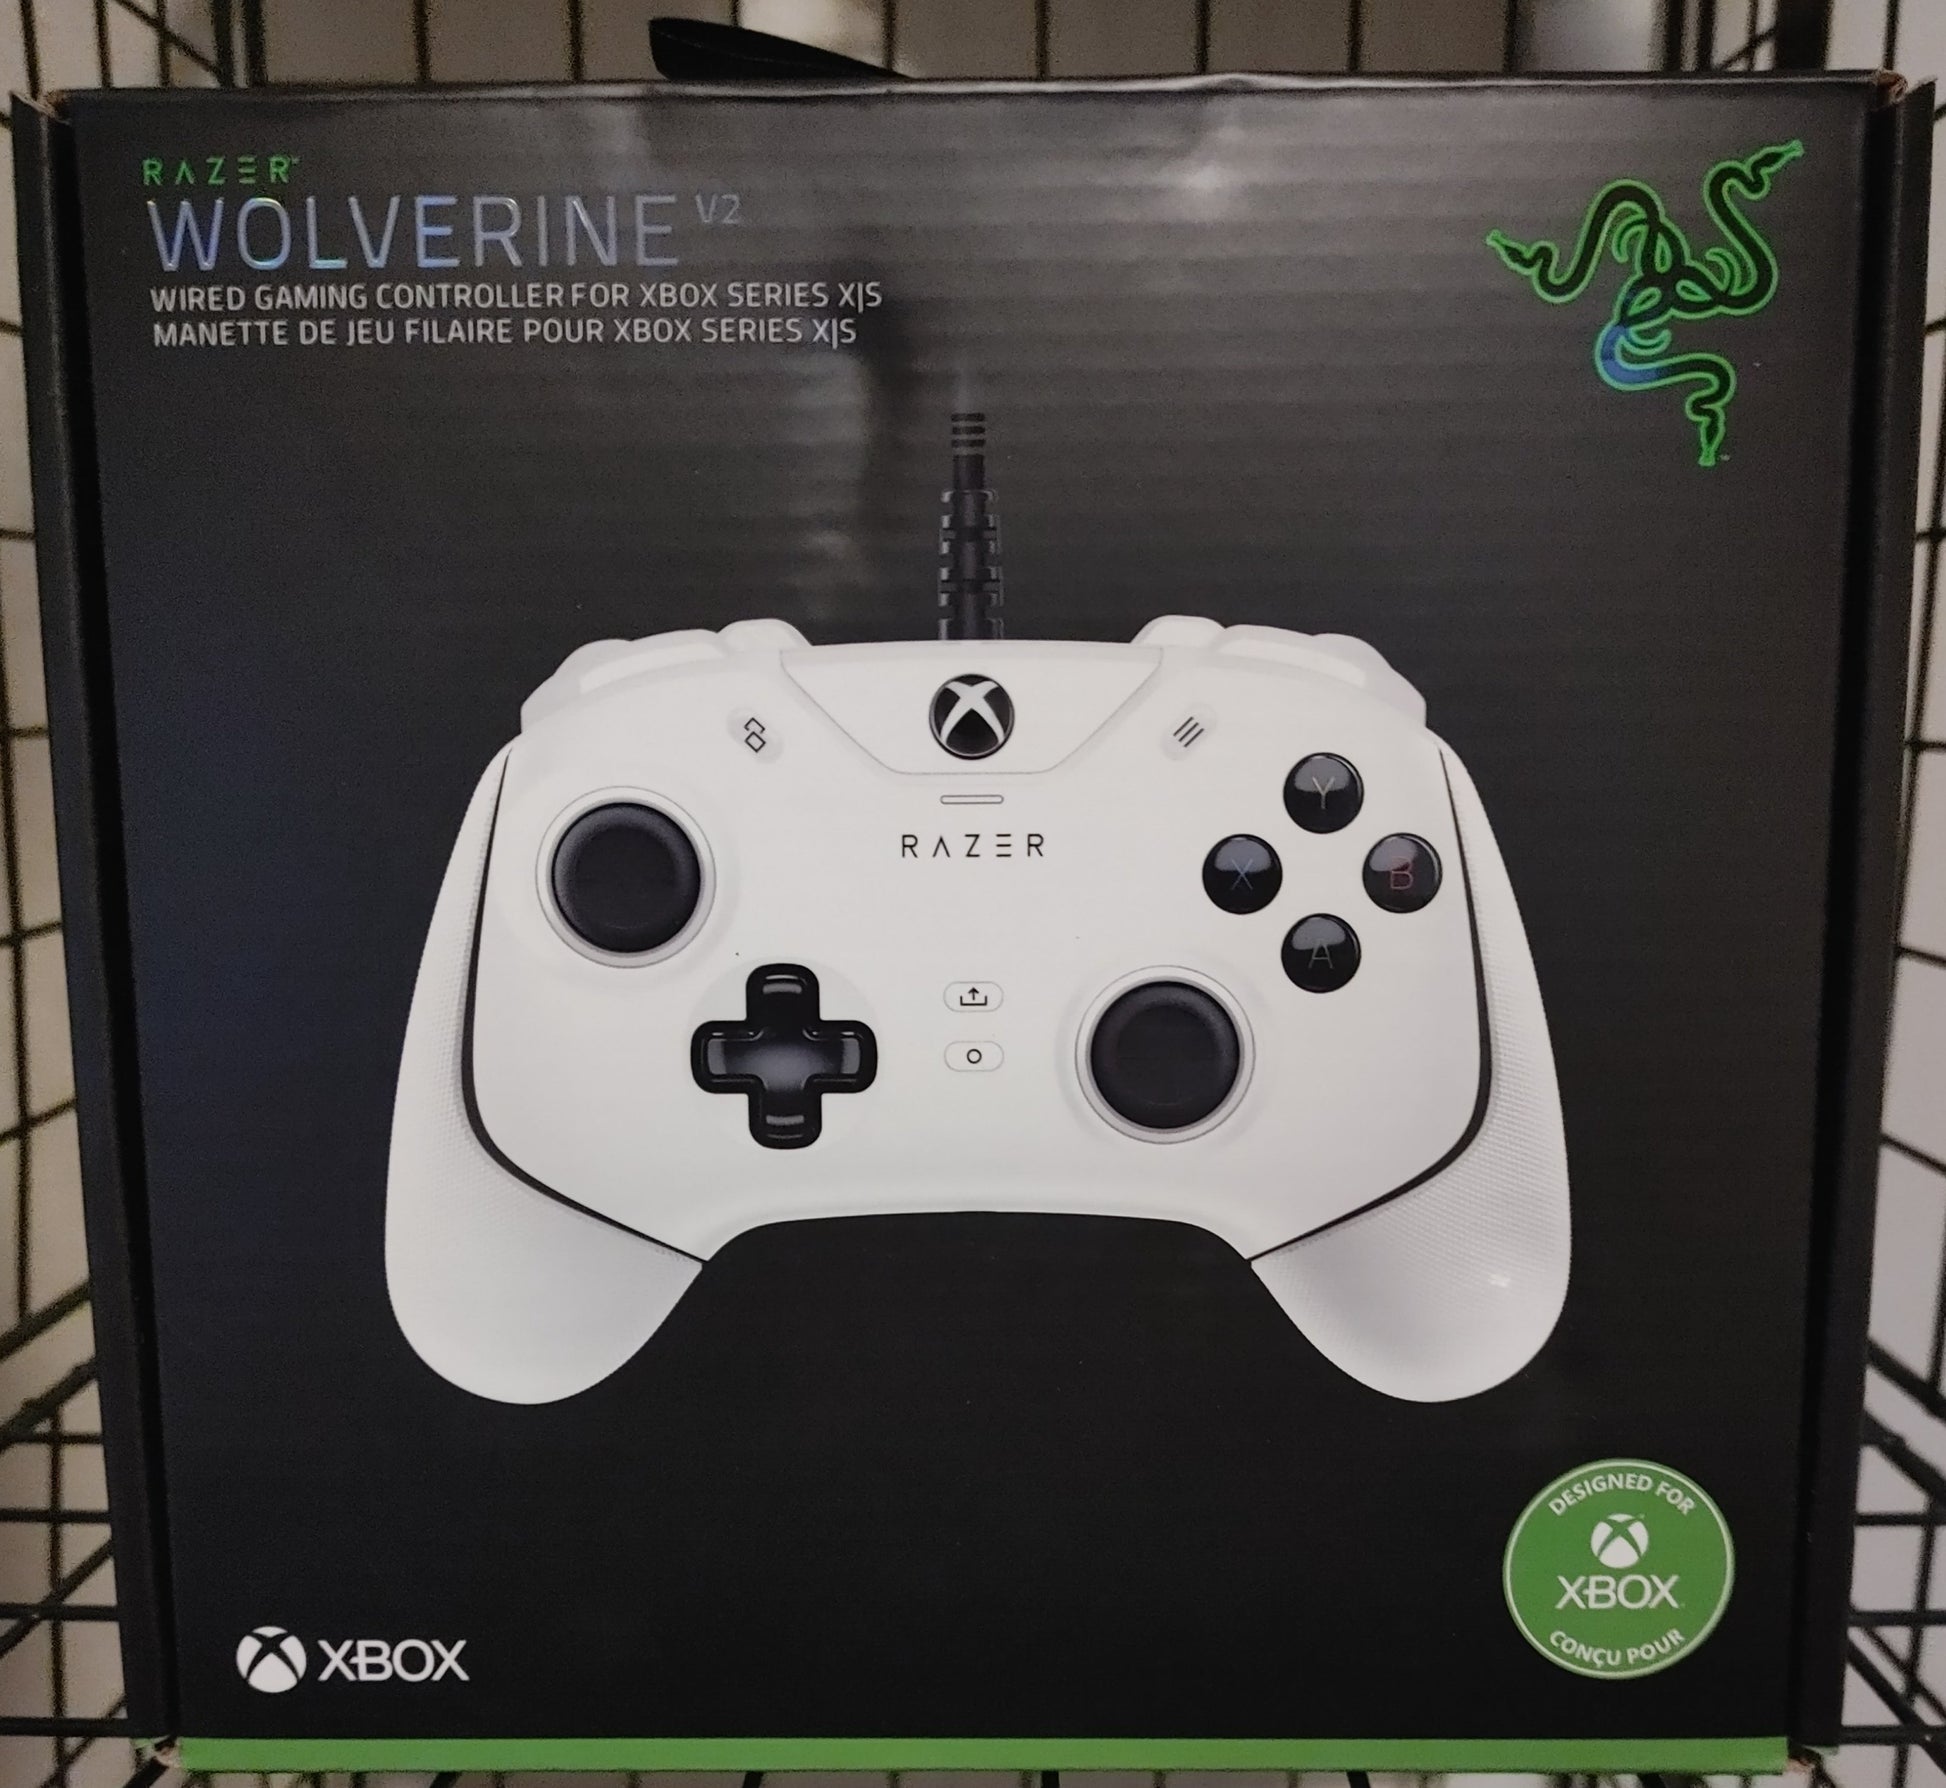 Xbox Razor Wolverine V2 Wired Gaming Controller Series XIS – Comic Cove